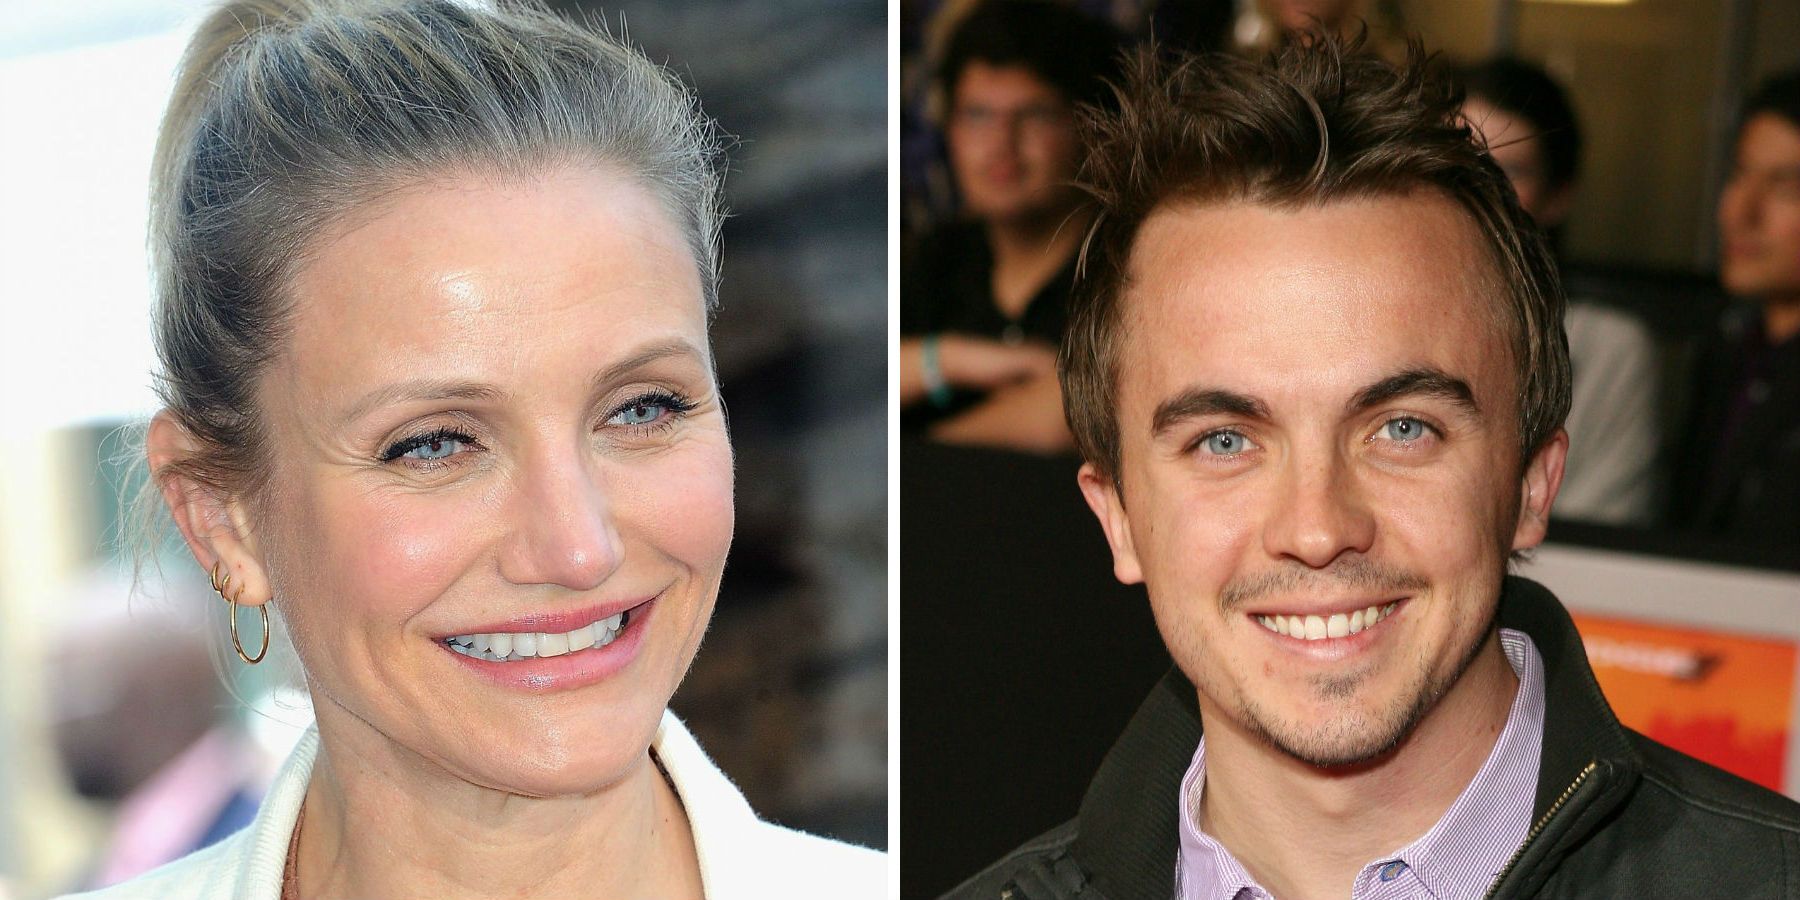 side by side images of Cameron Diaz and Frankie Muniz